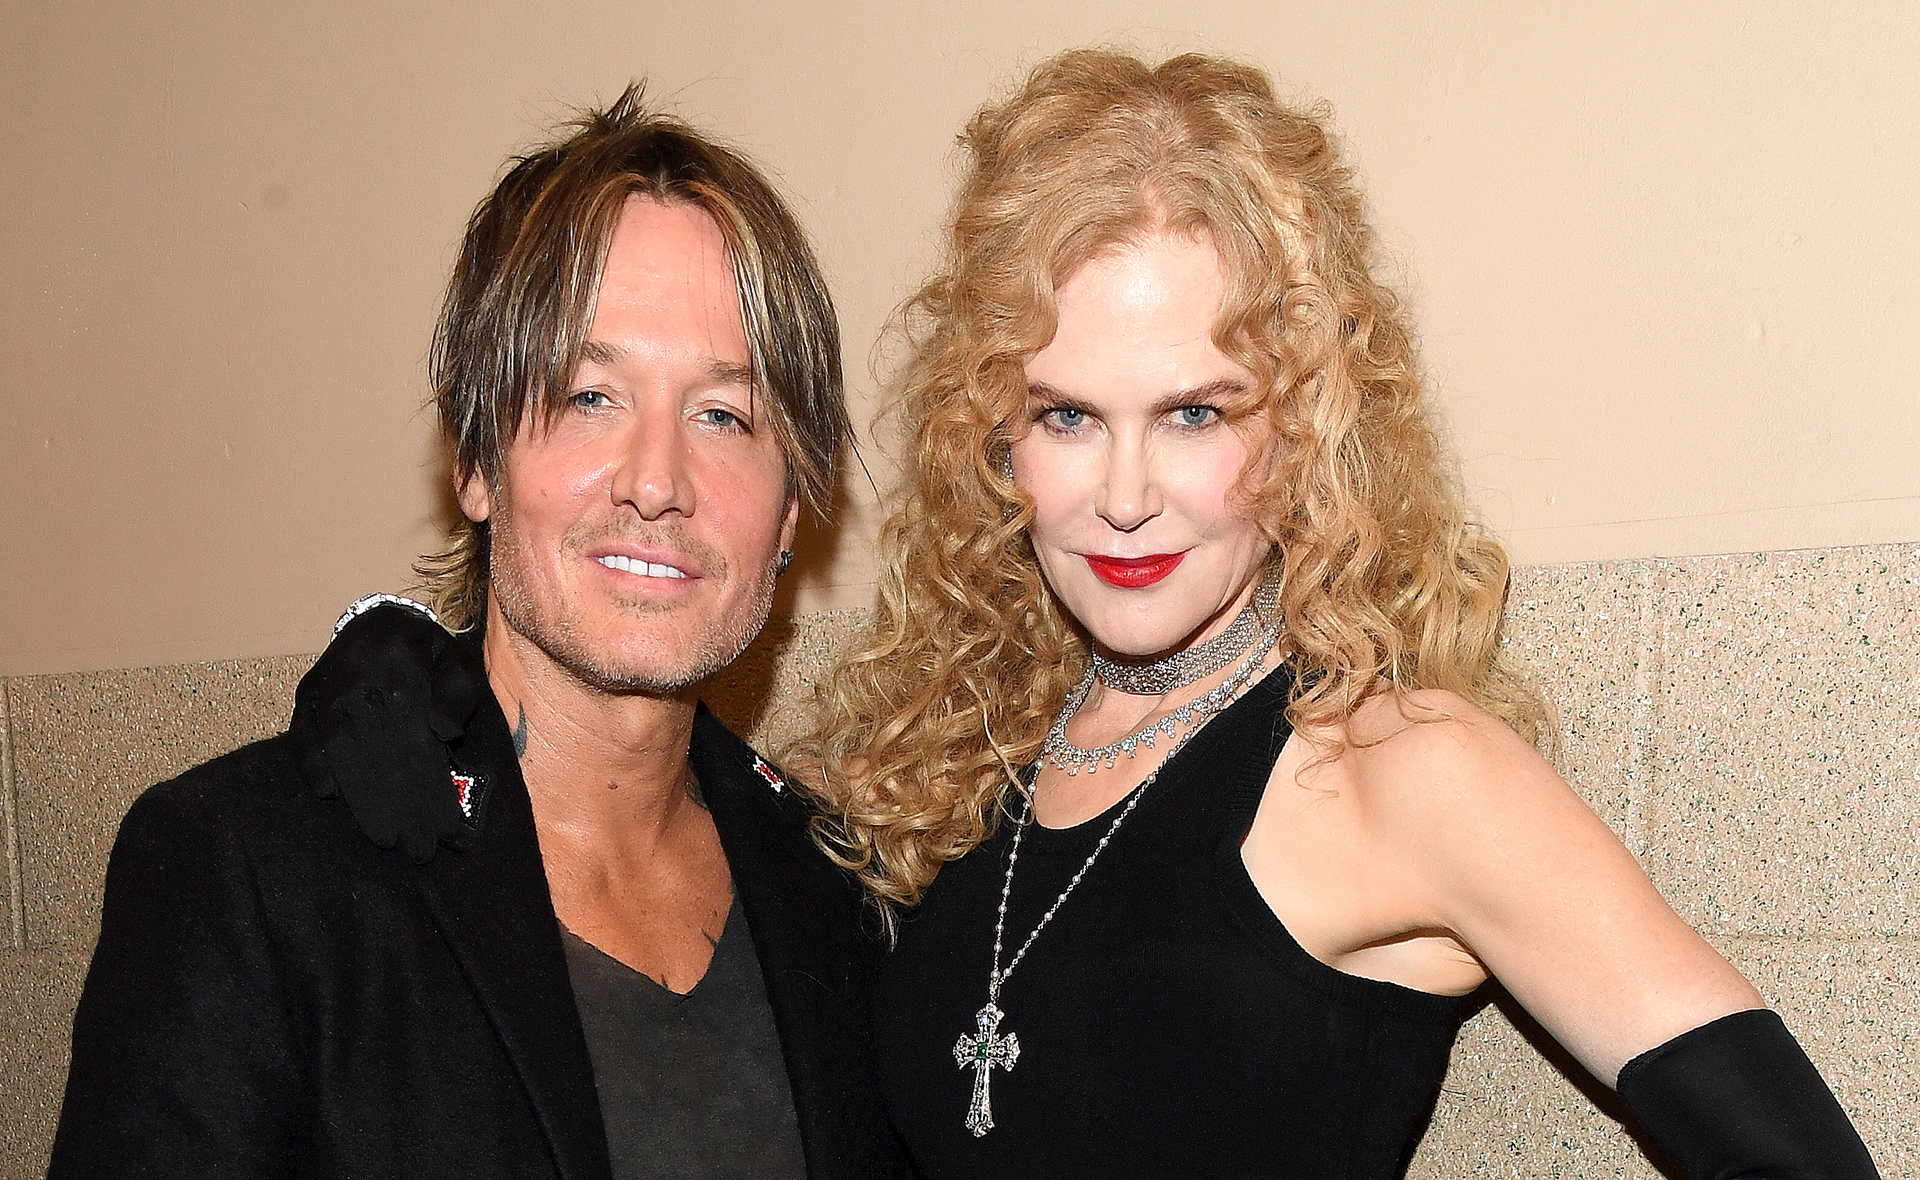 She’s a Material Girl! Nicole Kidman channels Madonna in an eye-catching rock’n’roll outfit